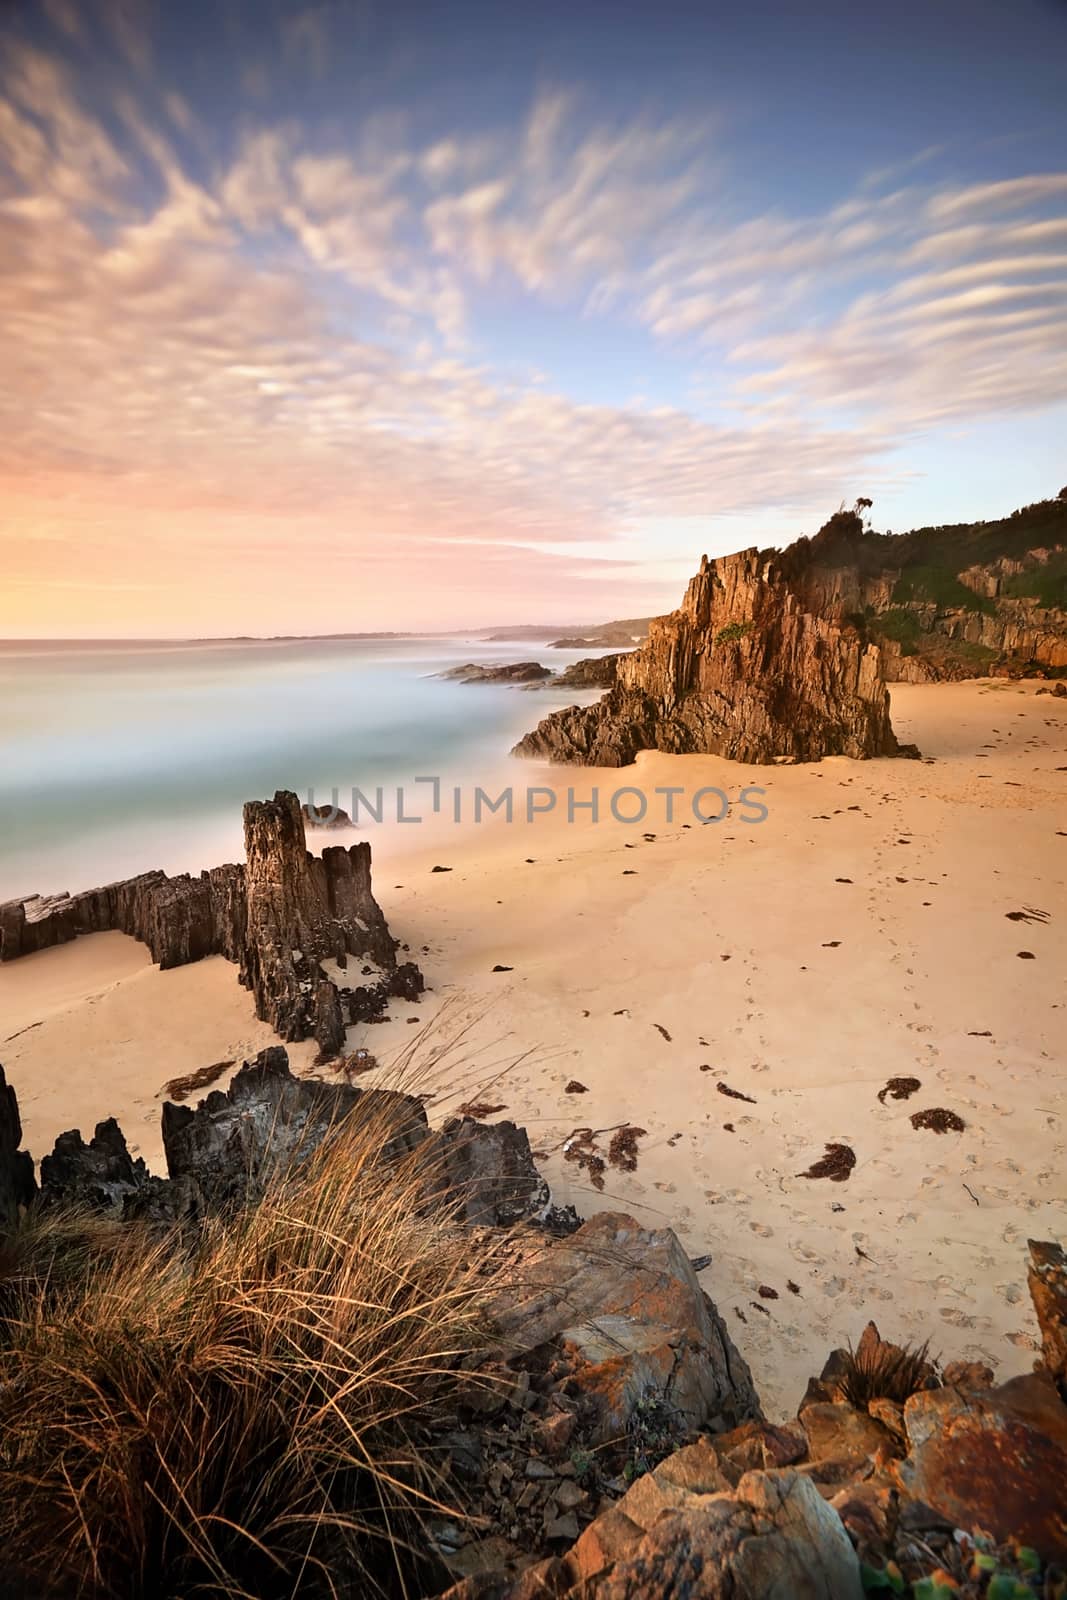 Early morning hues standing high on a sea stack and views south across the beach and sea stacks of Mullimburra Point South beach in Eurobodalla National Park.  Long Exposure.